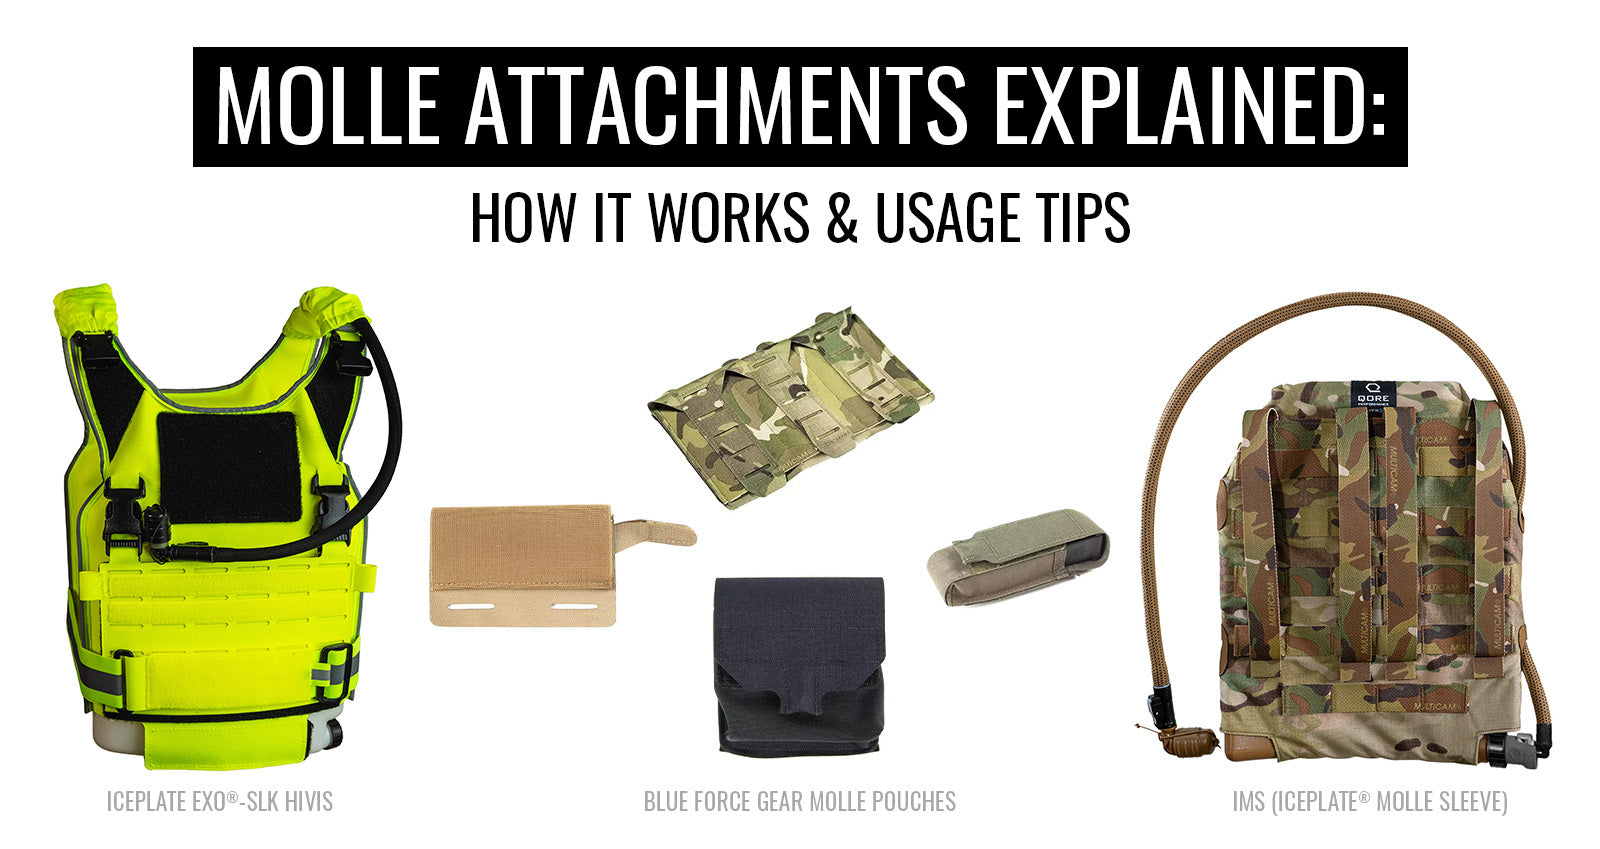 What is MOLLE system and how to work with it?